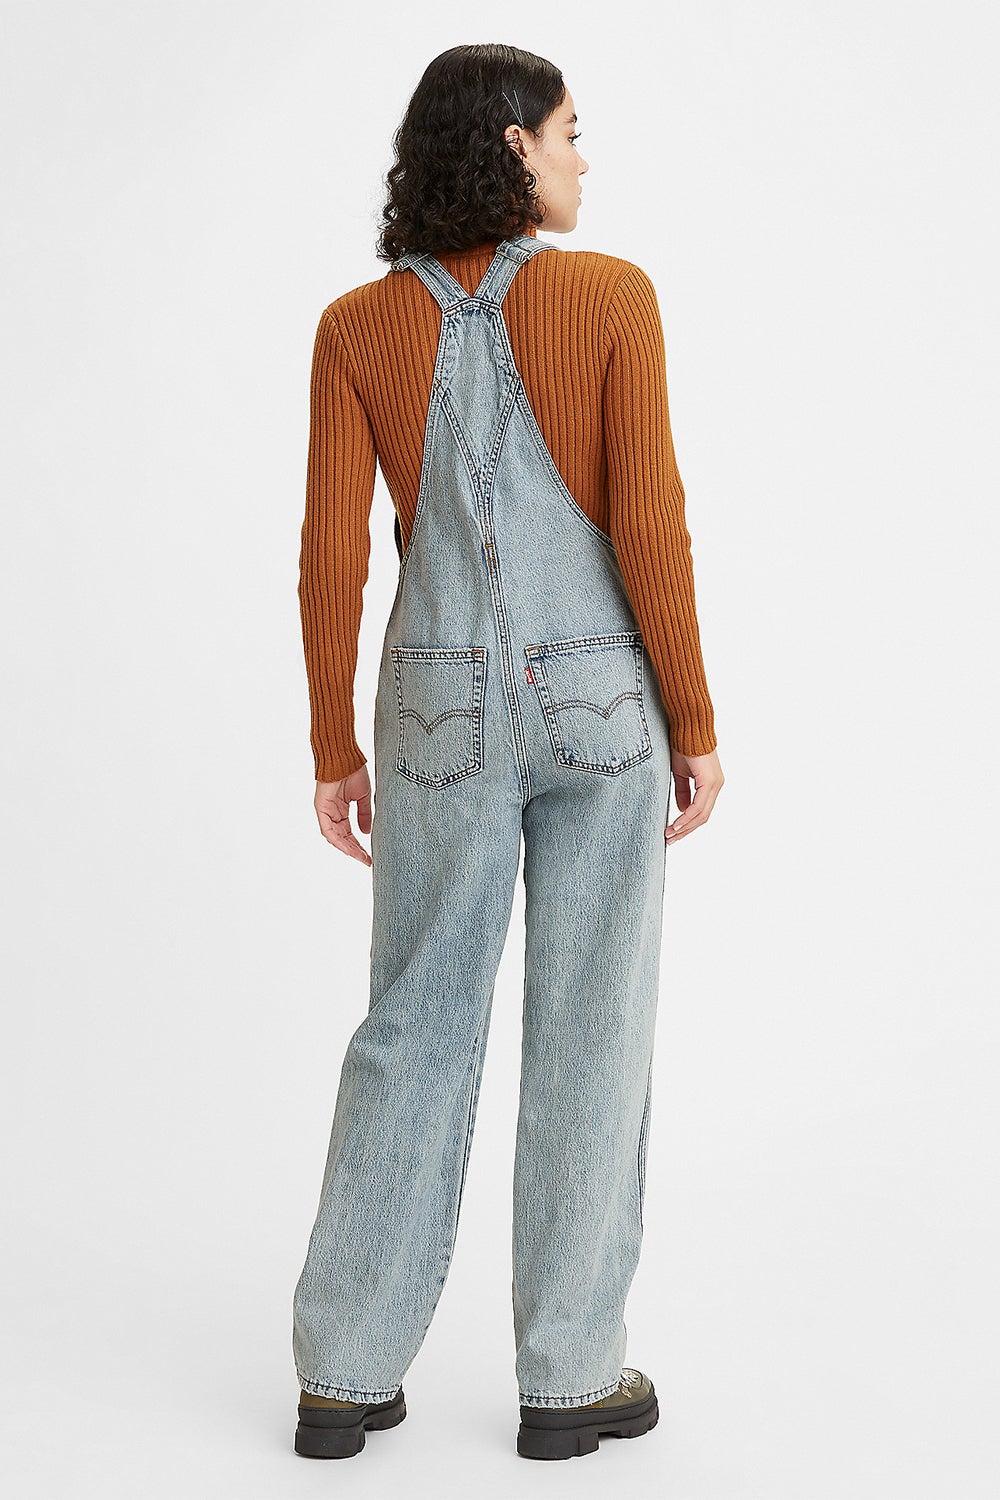 Levi's Vintage Overall No Stone Unturned